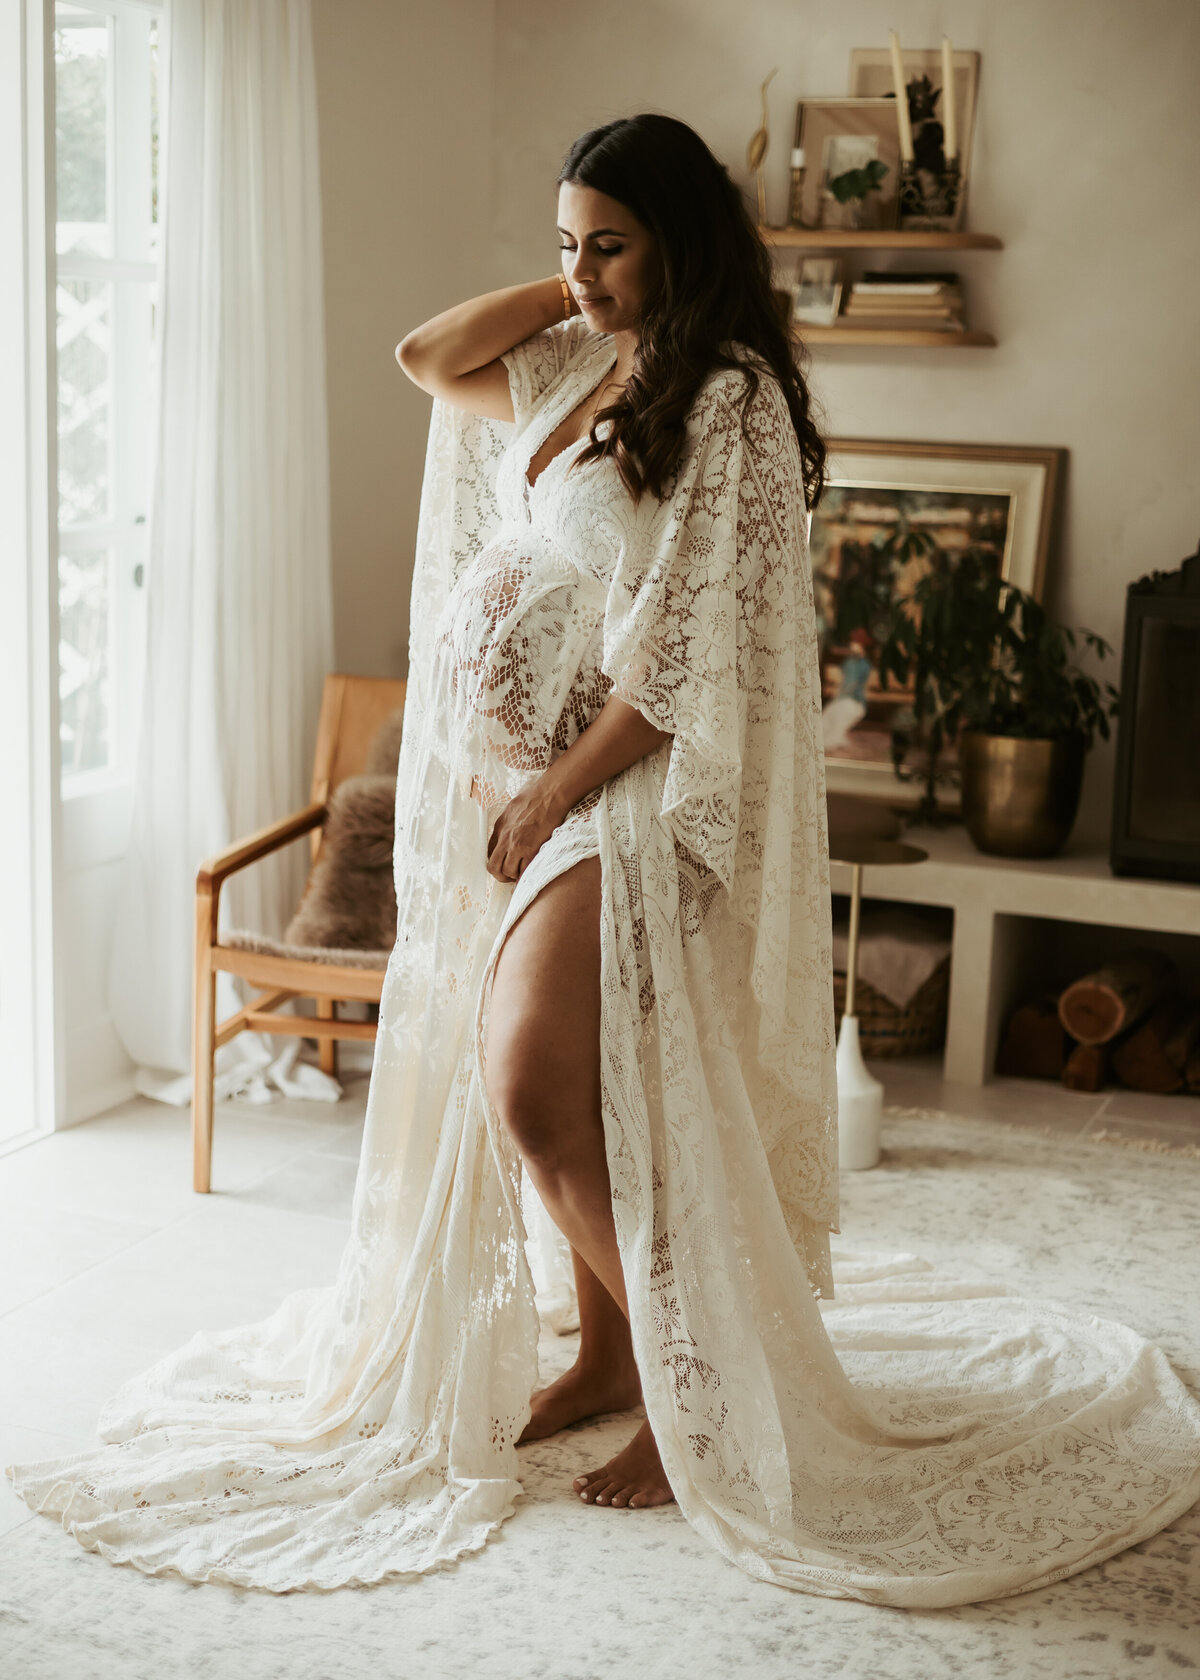 Mother to be in white long lace gown posing for in-home maternity photoshoot.